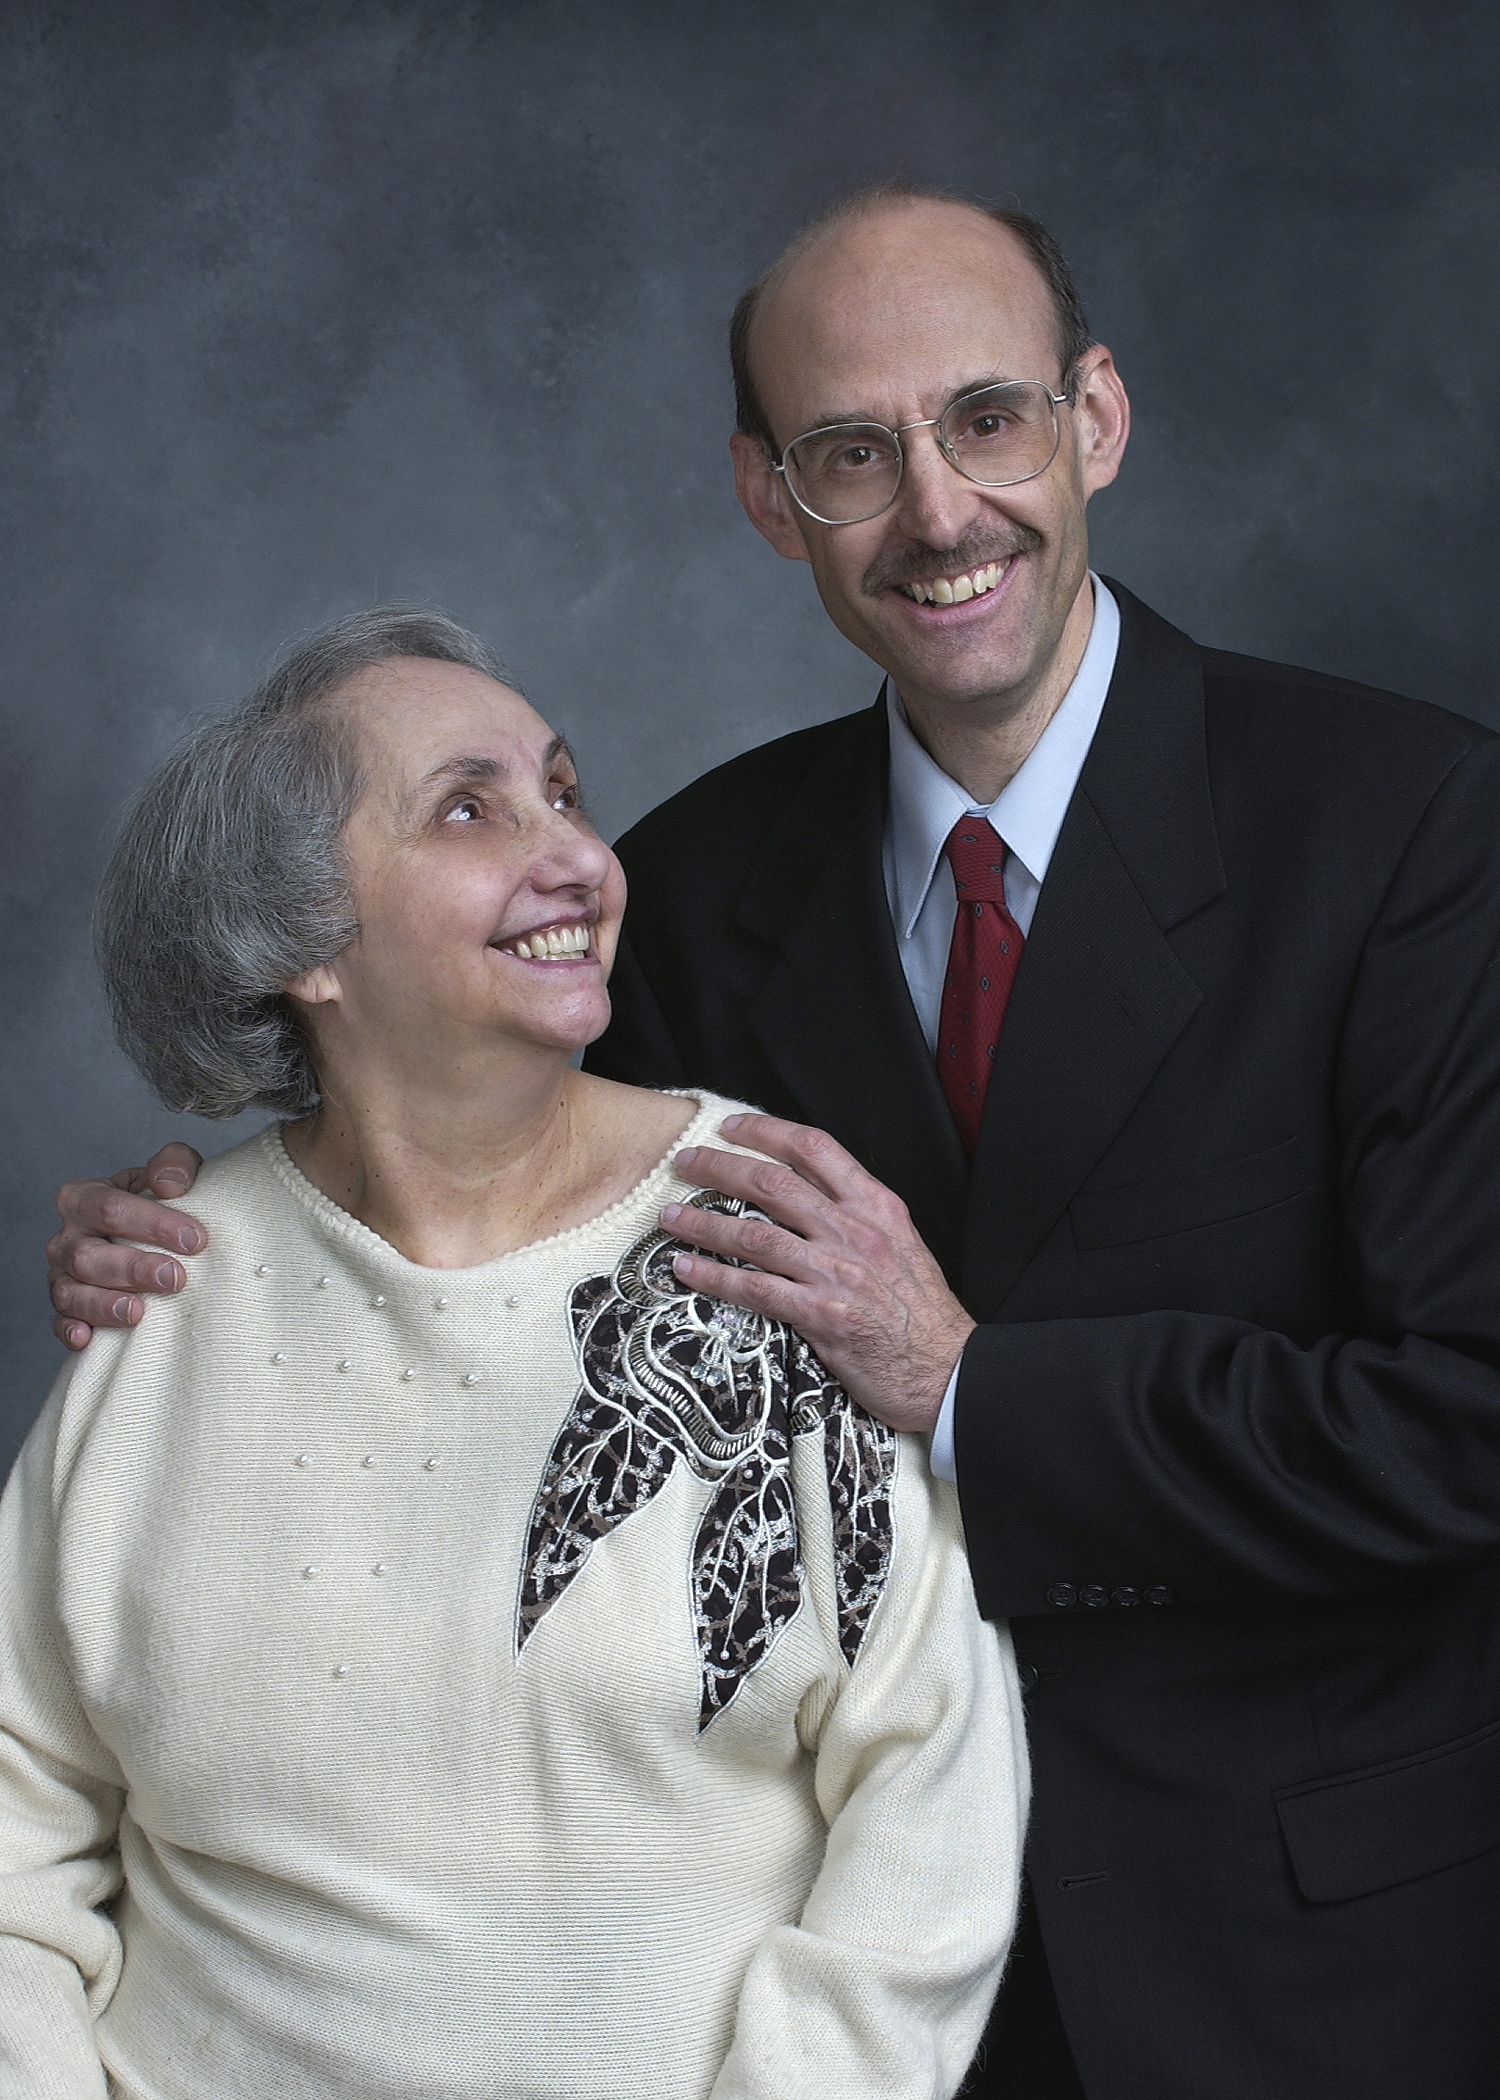 Pictured are Shirley Schriftman and her son Ross Schriftman.